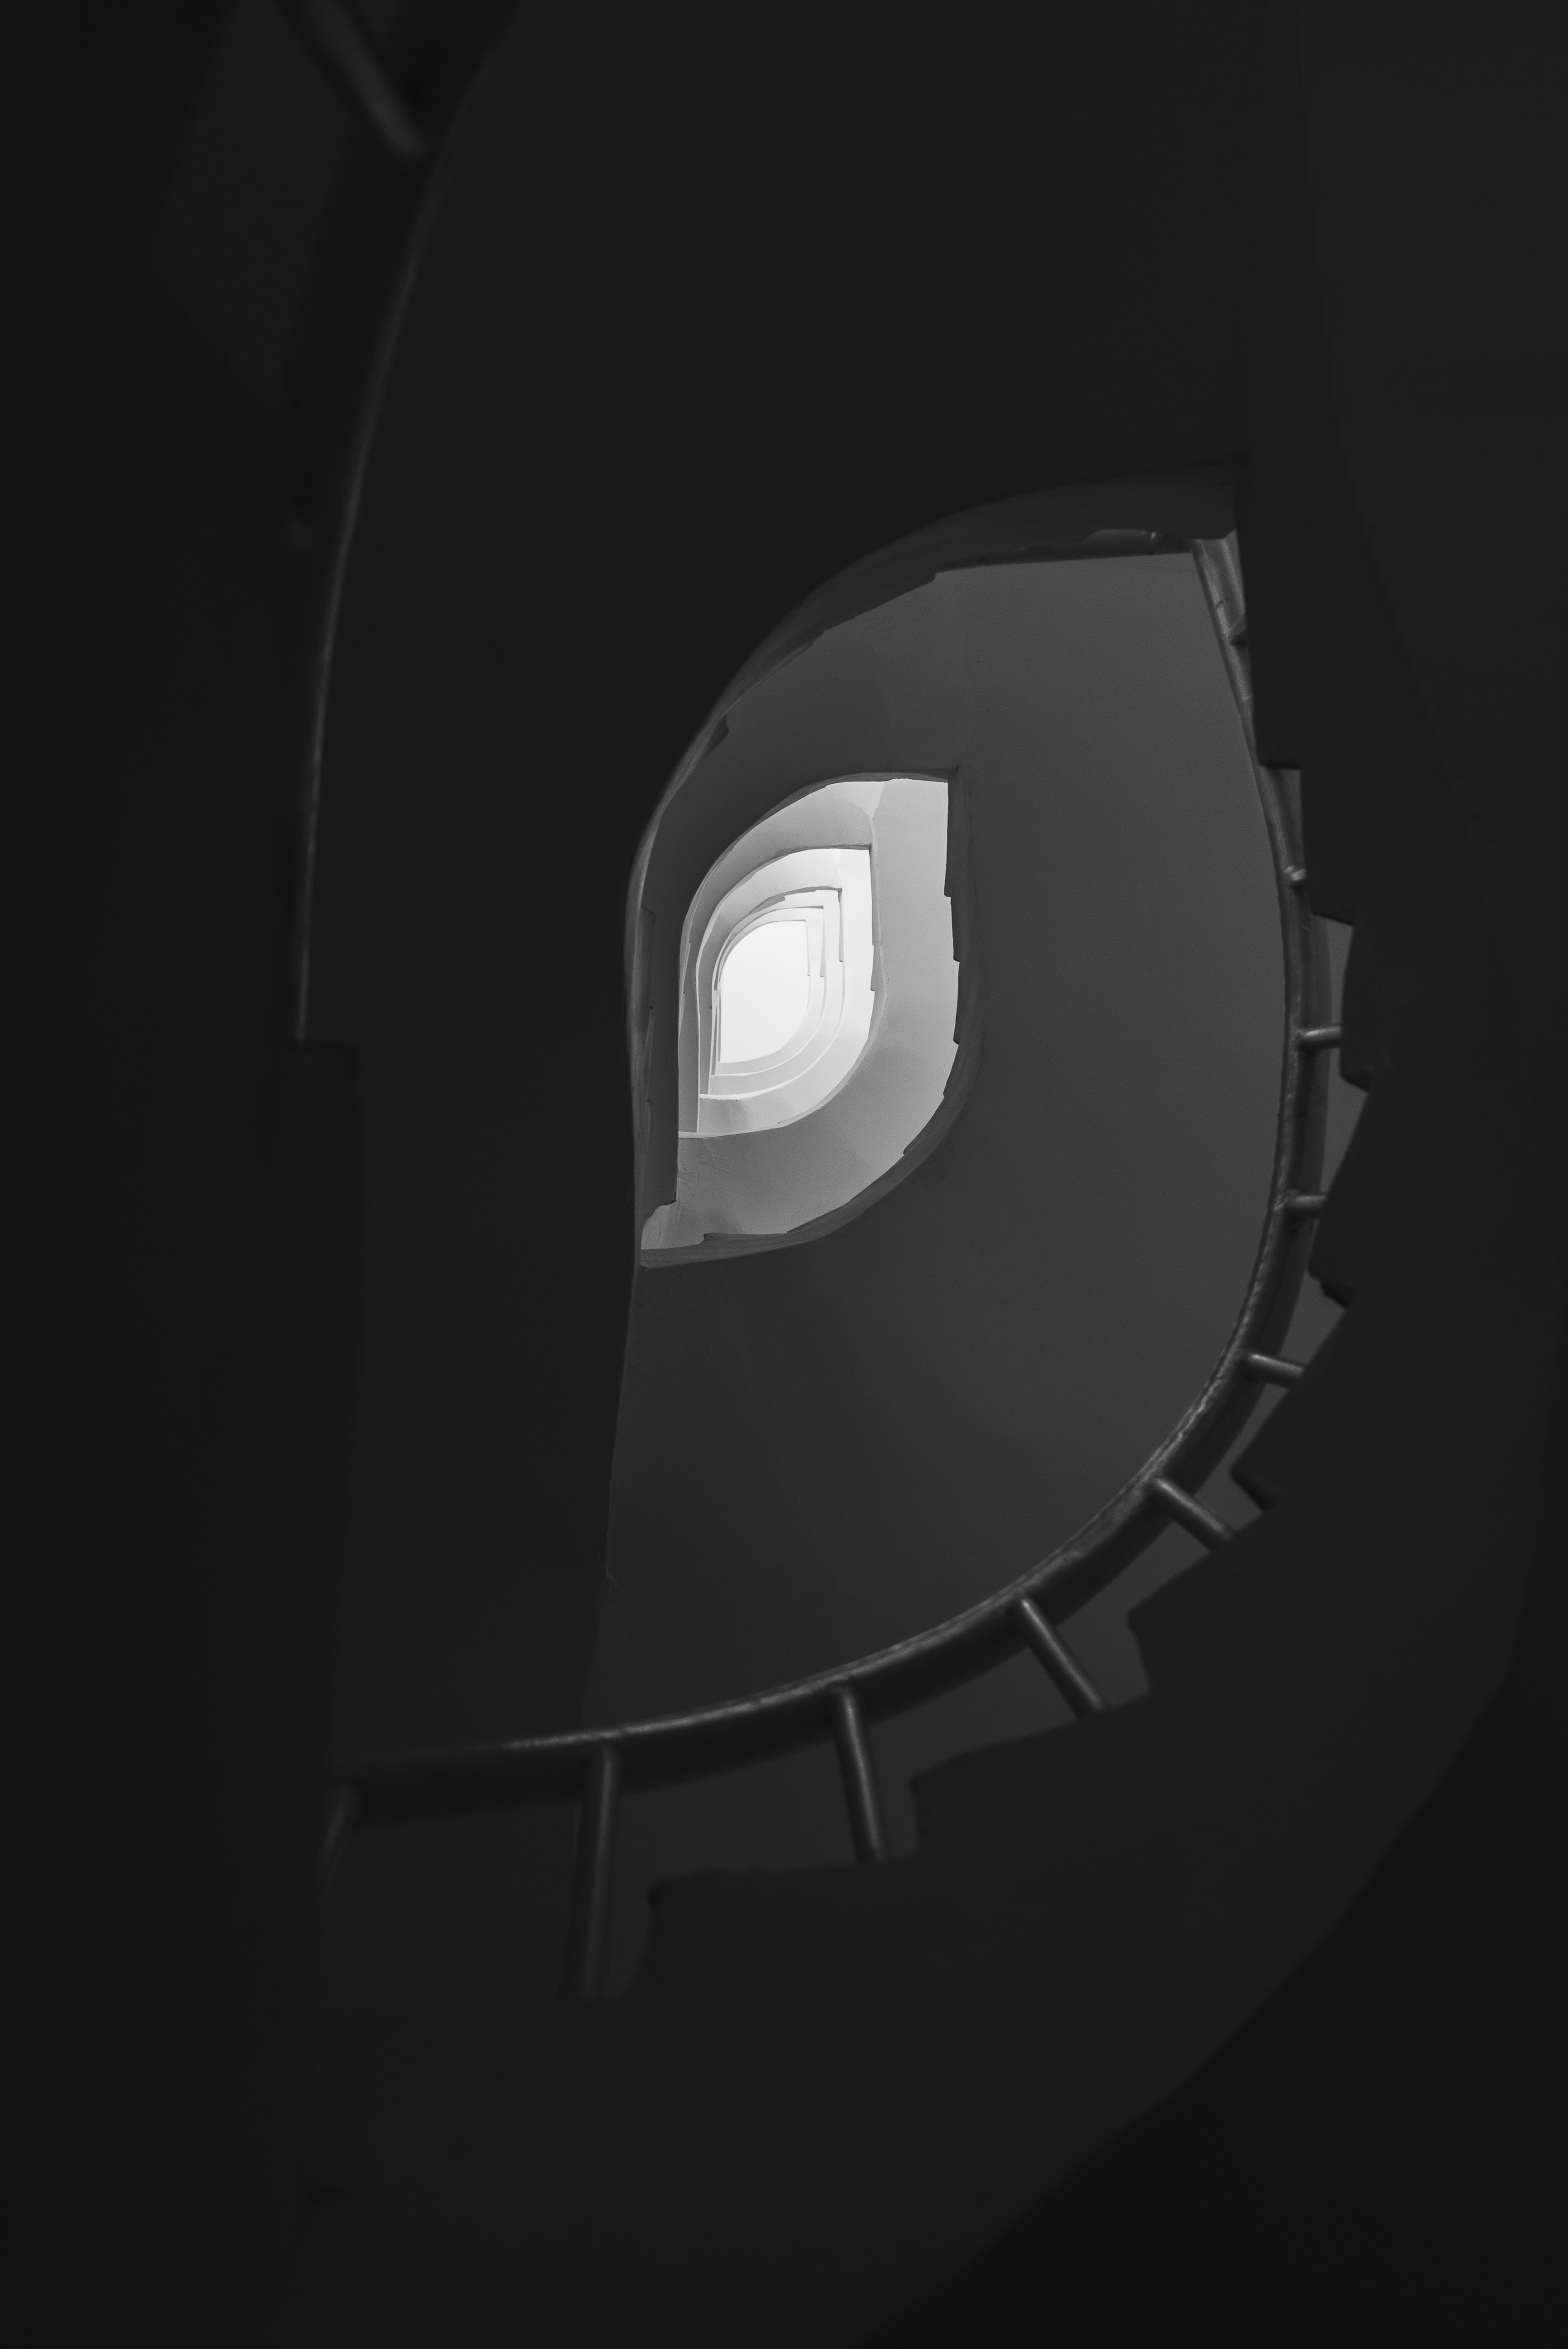 minimalism, bw, chb, stairs, ladder, bottom view, spiral staircase, caracole cellphone